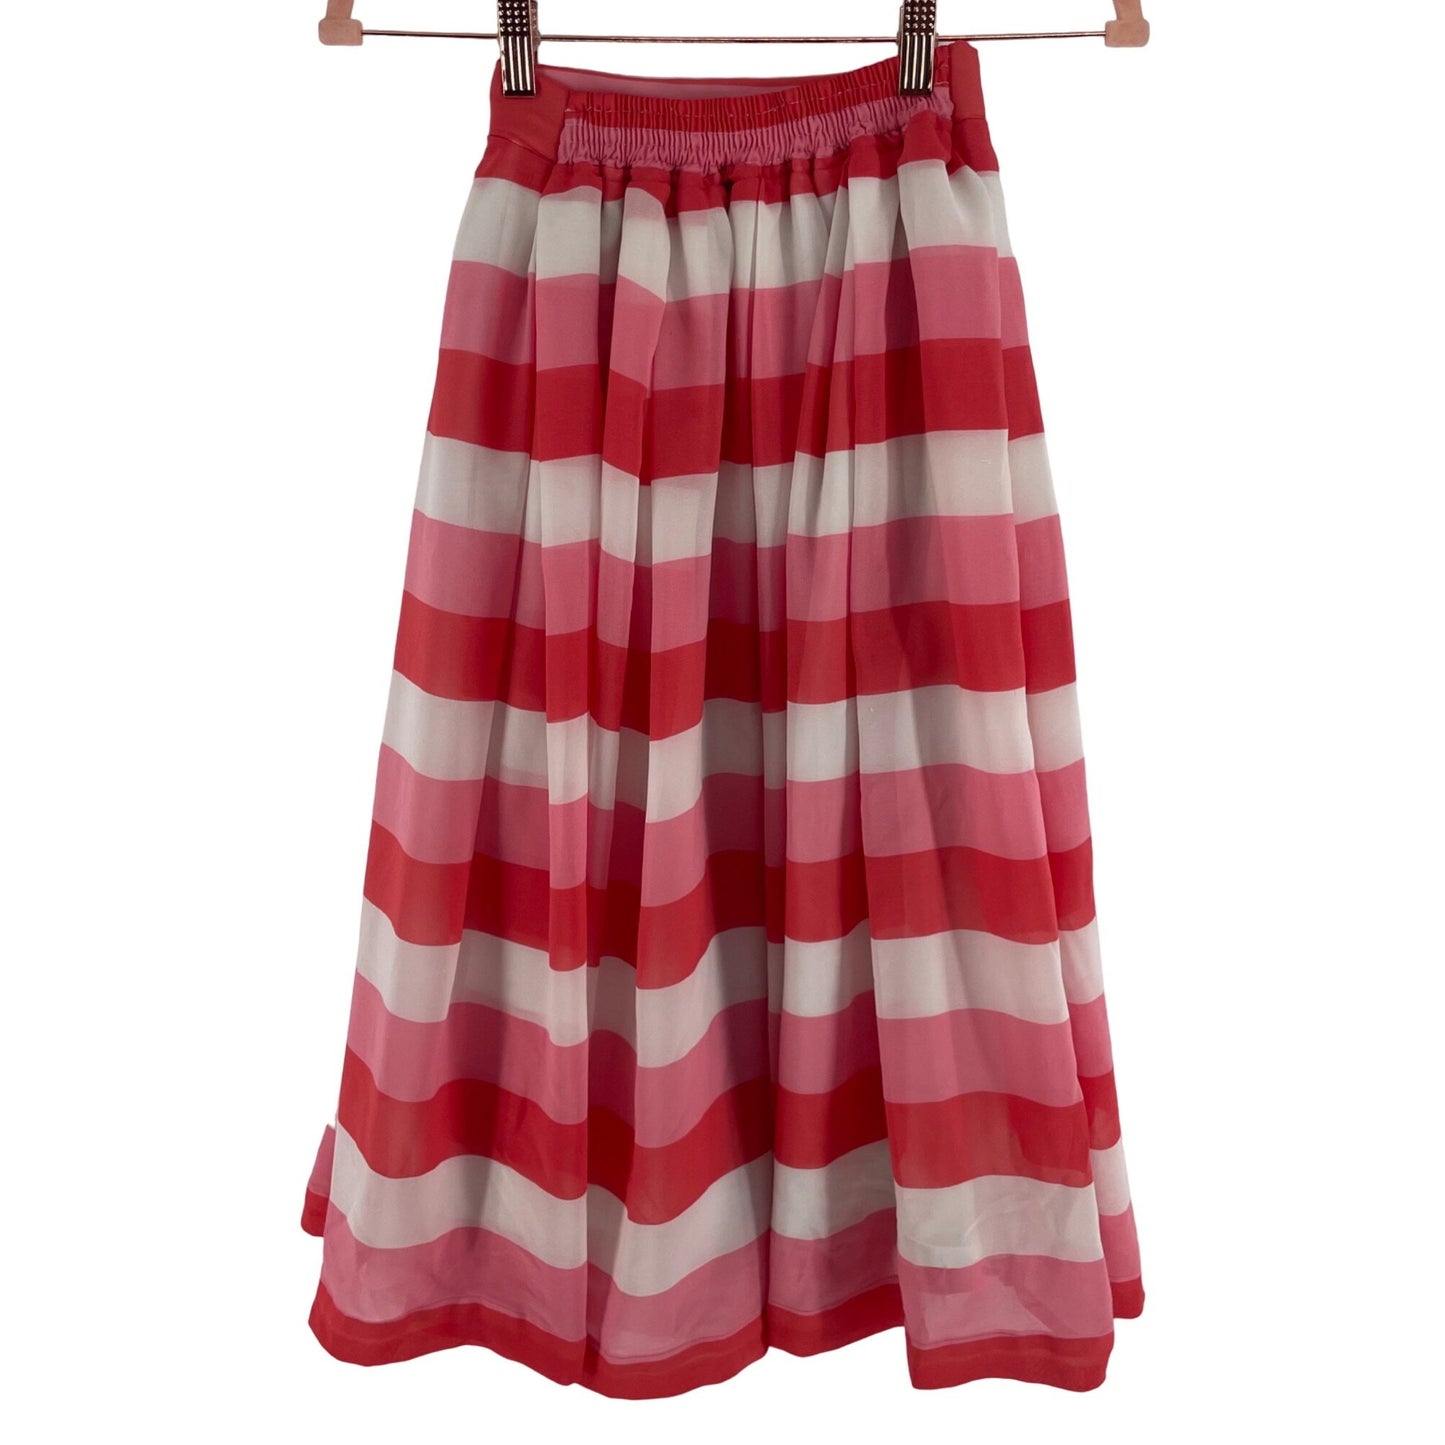 Girl's Size 3/4 Pink/White Striped A-Line Max Skirt